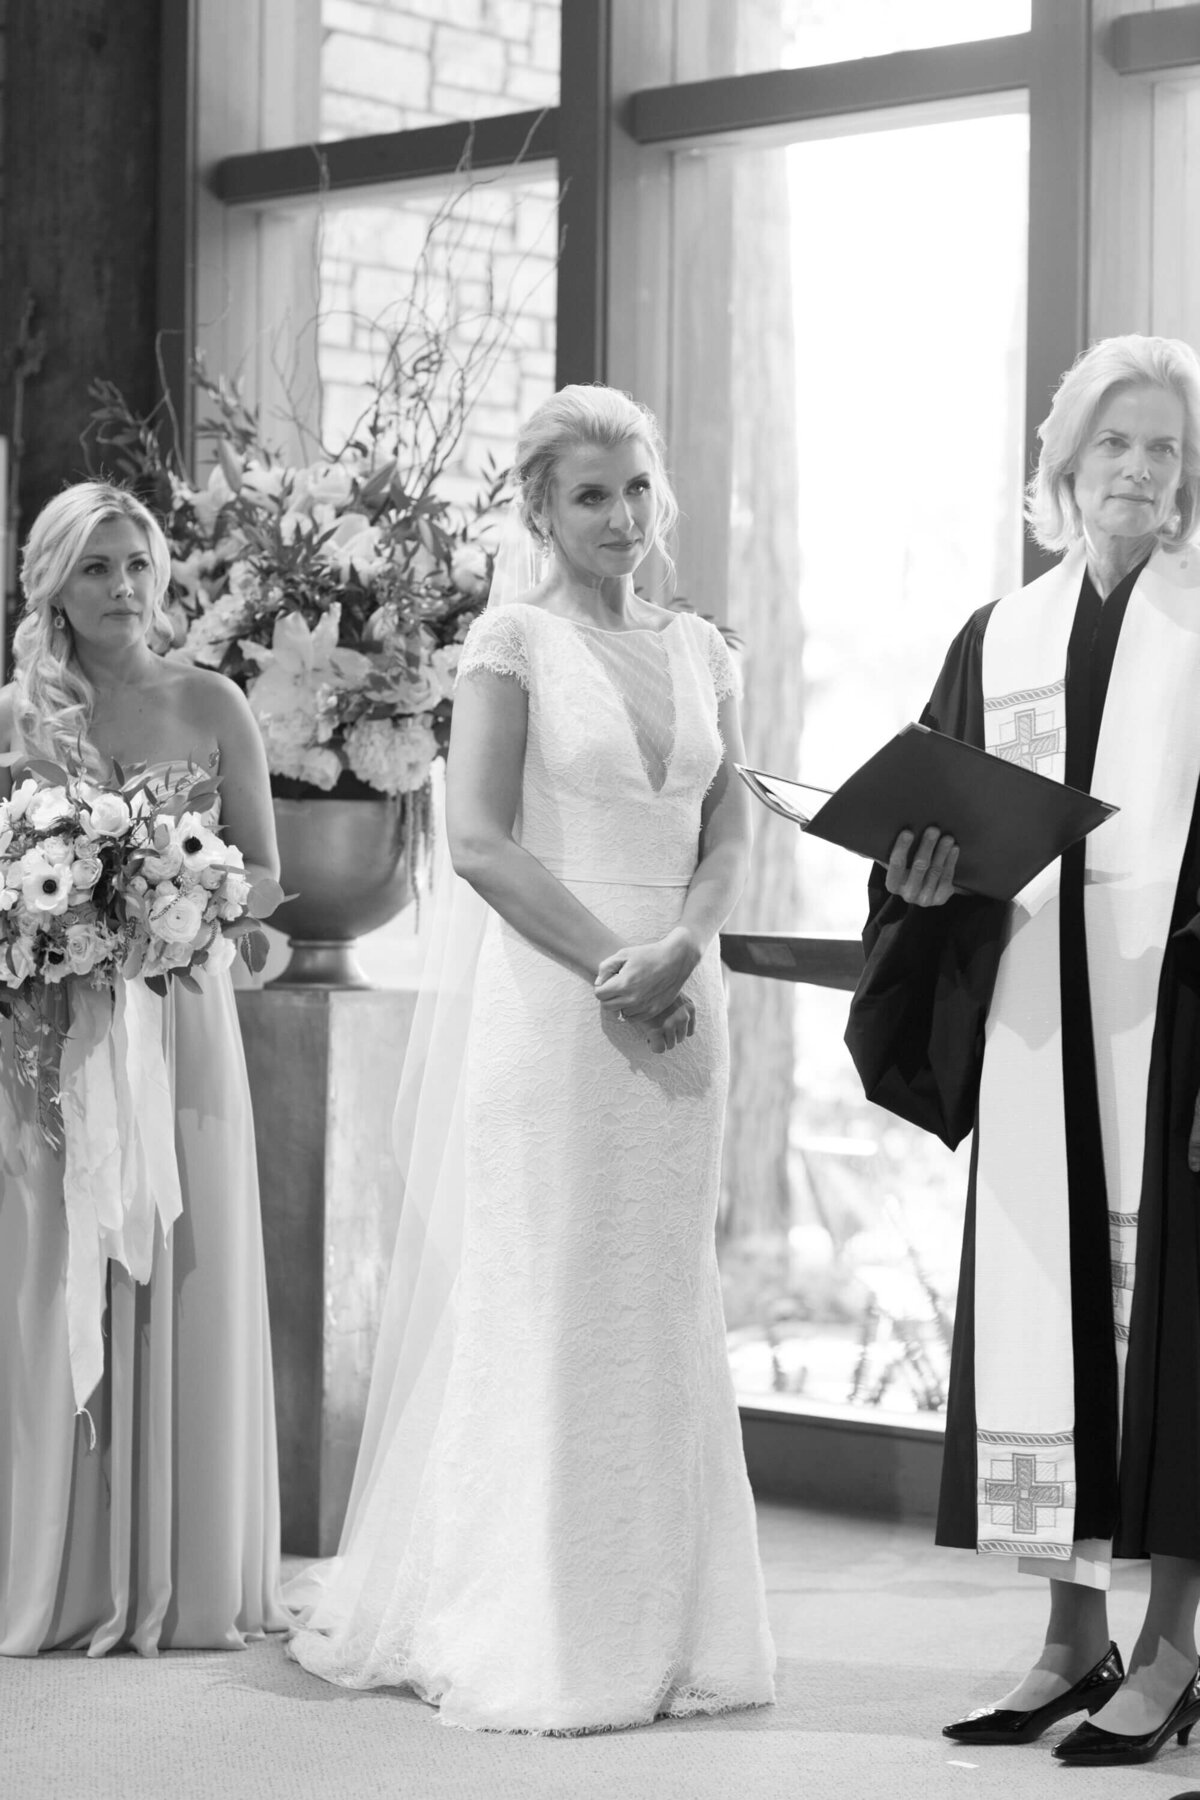 Bride stands tall as female officiator lays out the wedding roles and duties.